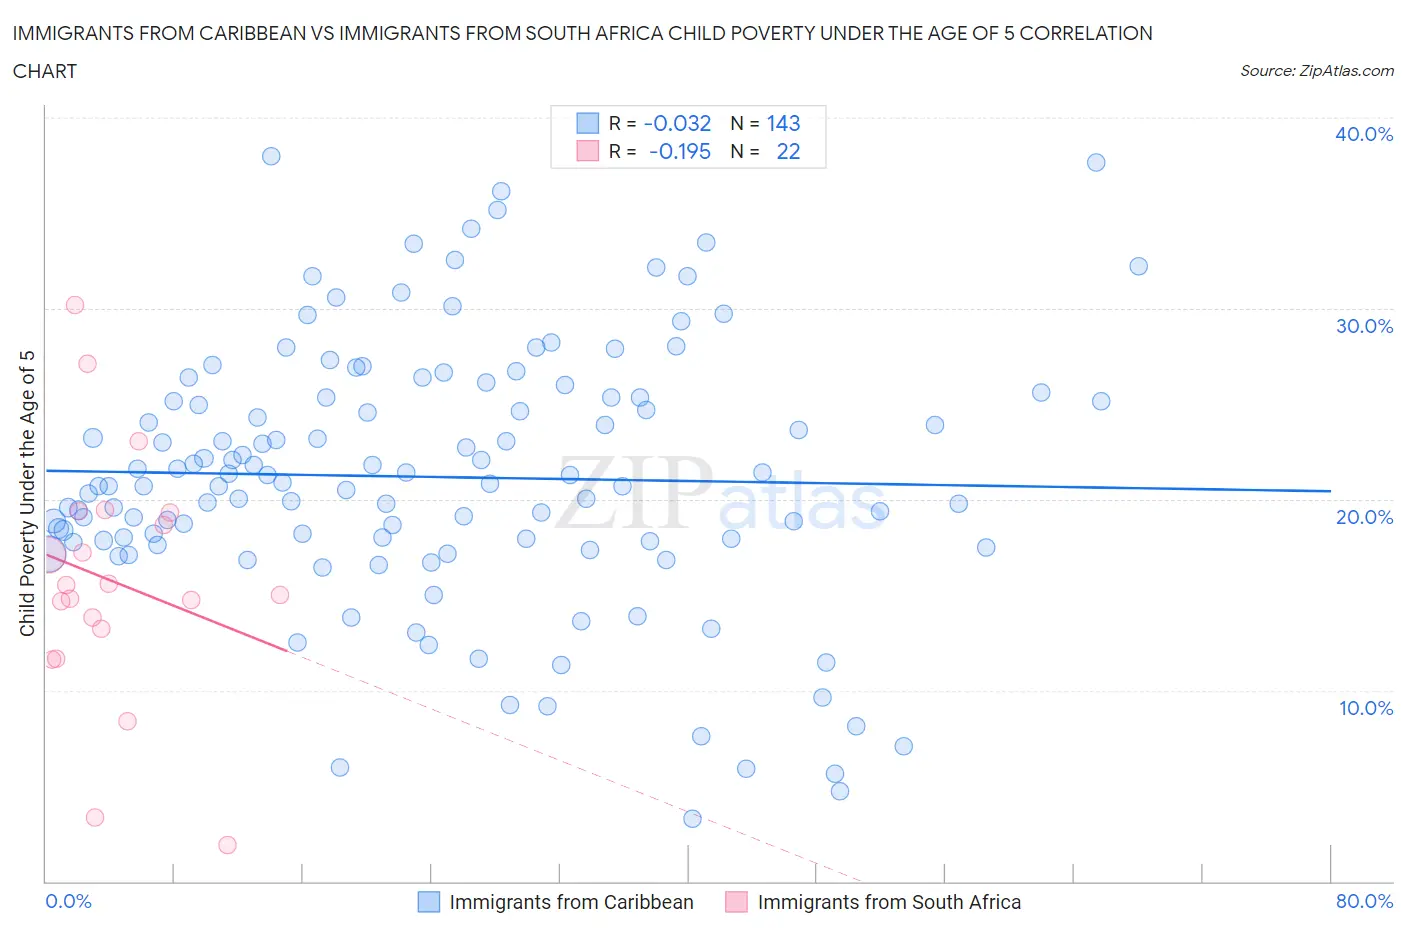 Immigrants from Caribbean vs Immigrants from South Africa Child Poverty Under the Age of 5